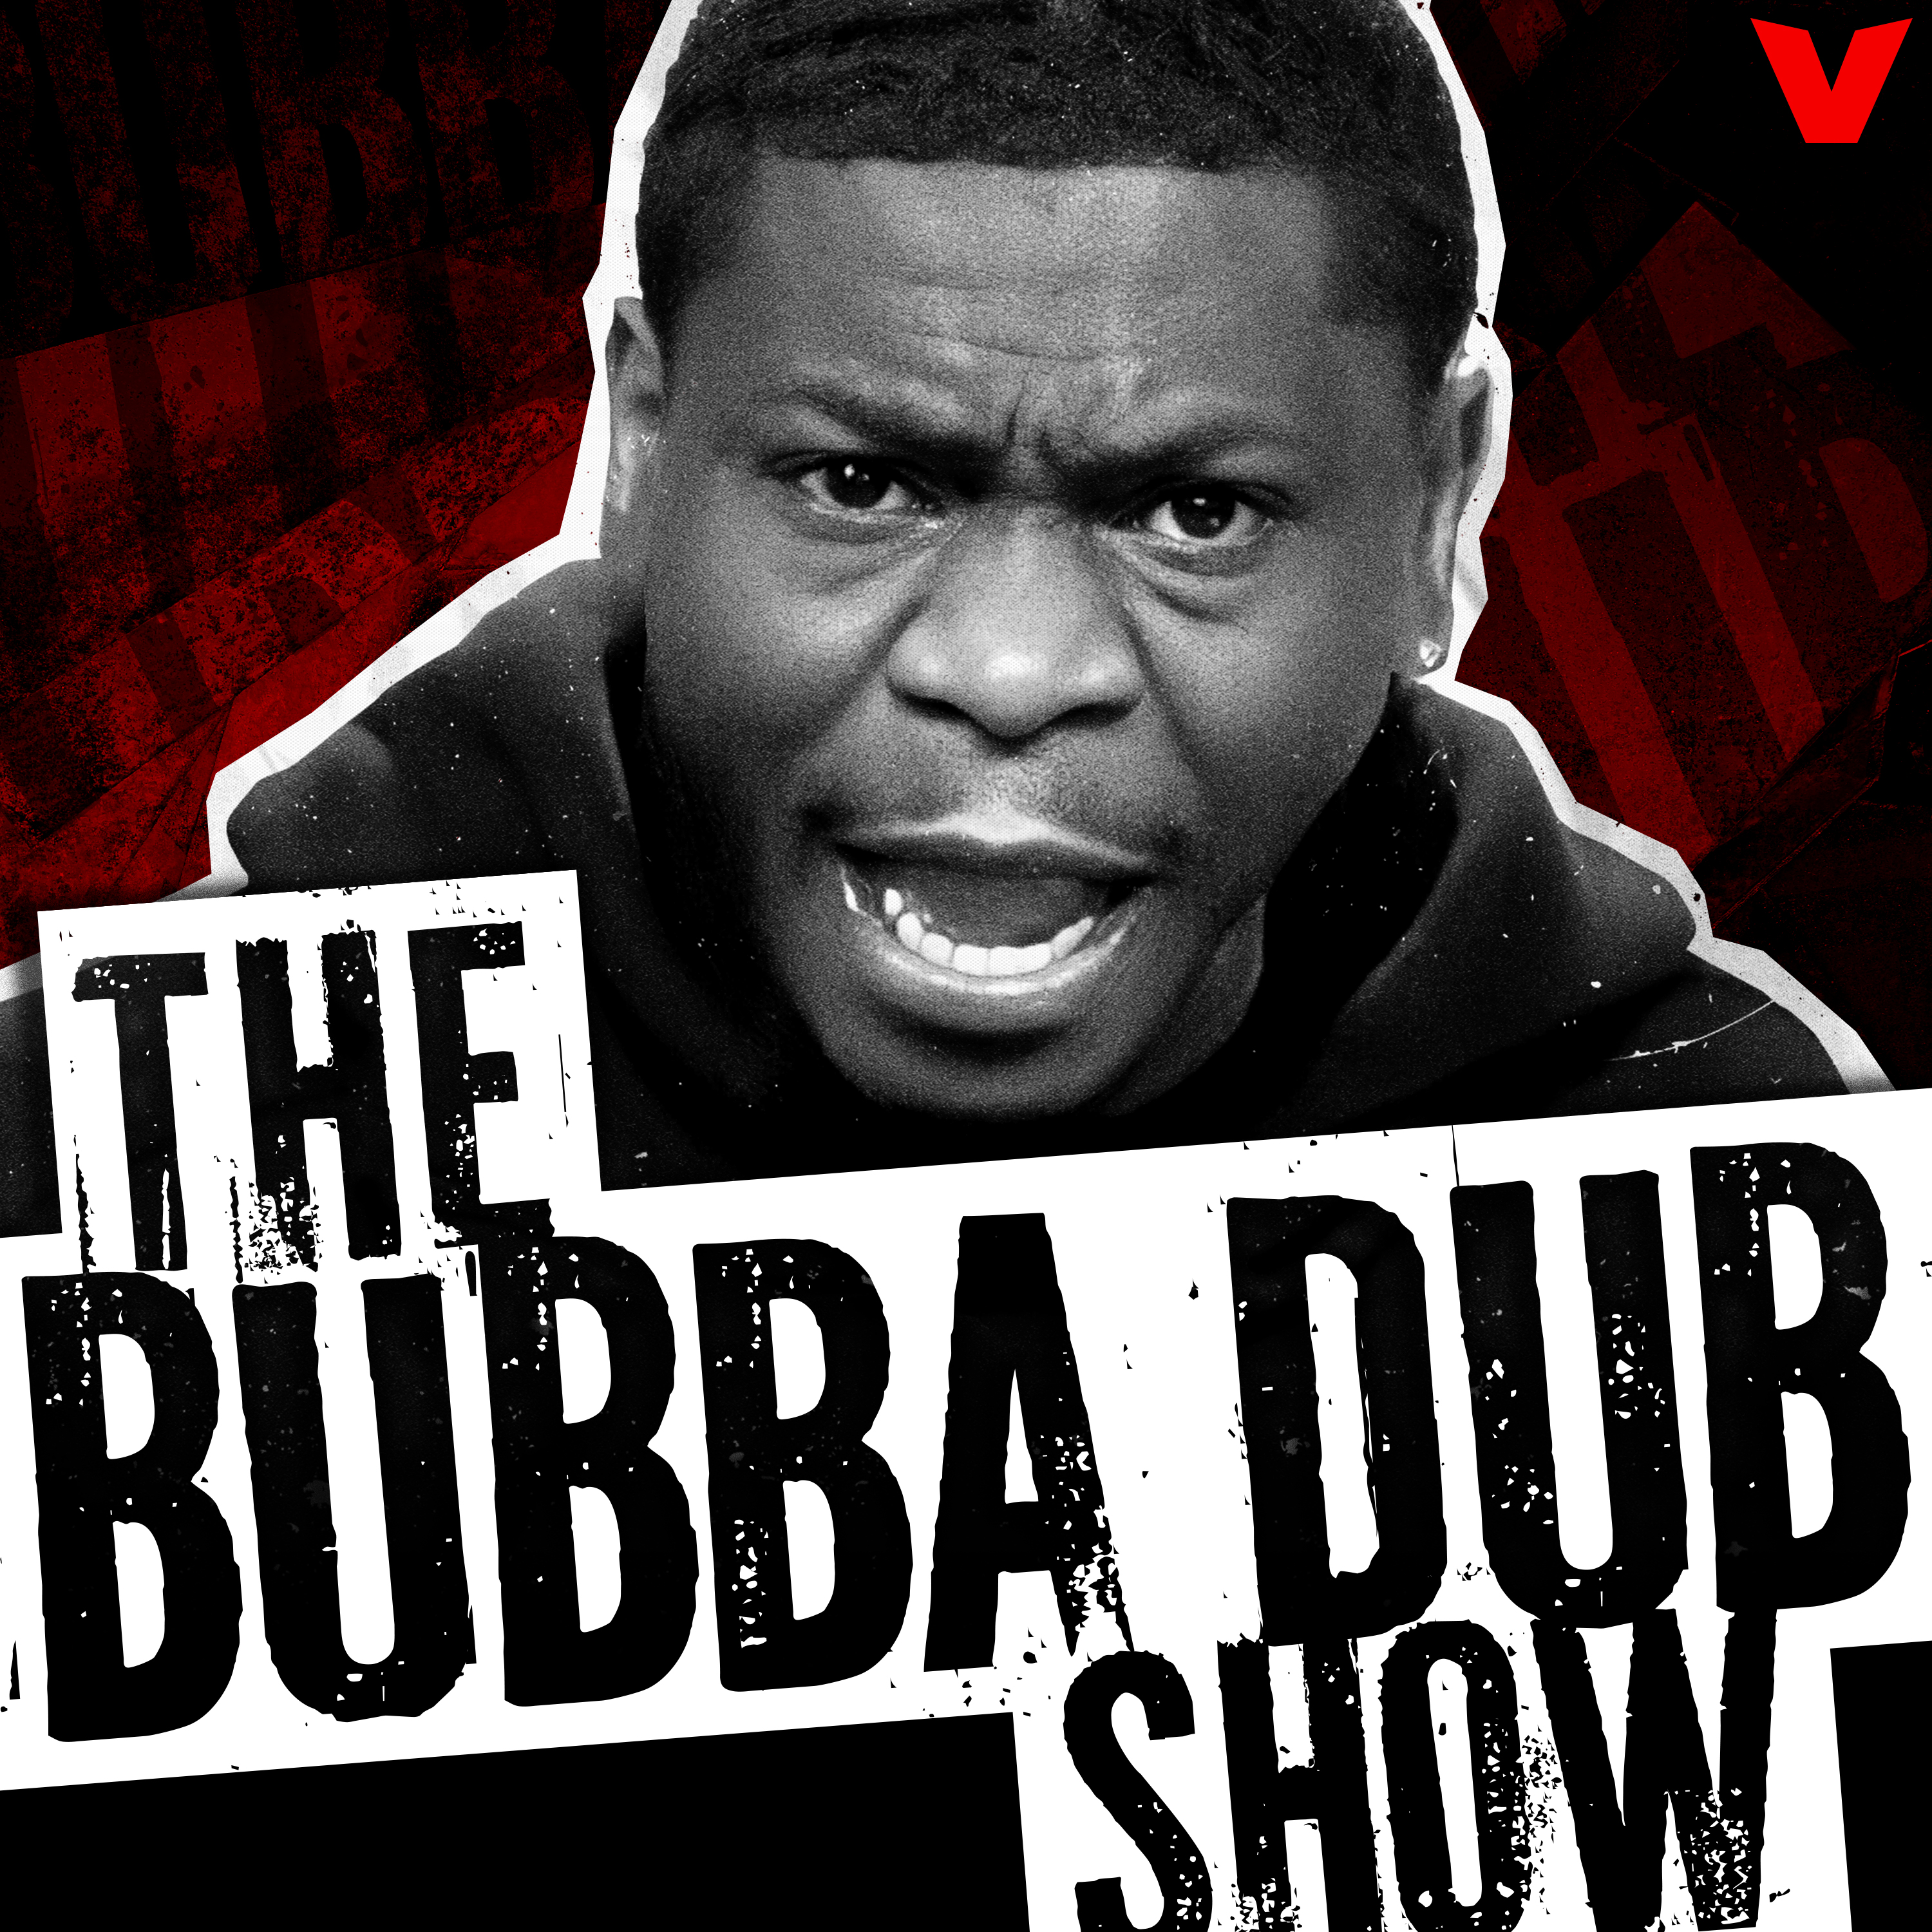 The Bubba Dub Show - Caitlin Clark Goes #1, NBA Play-In Preview, Bronny James, NFL Offseason